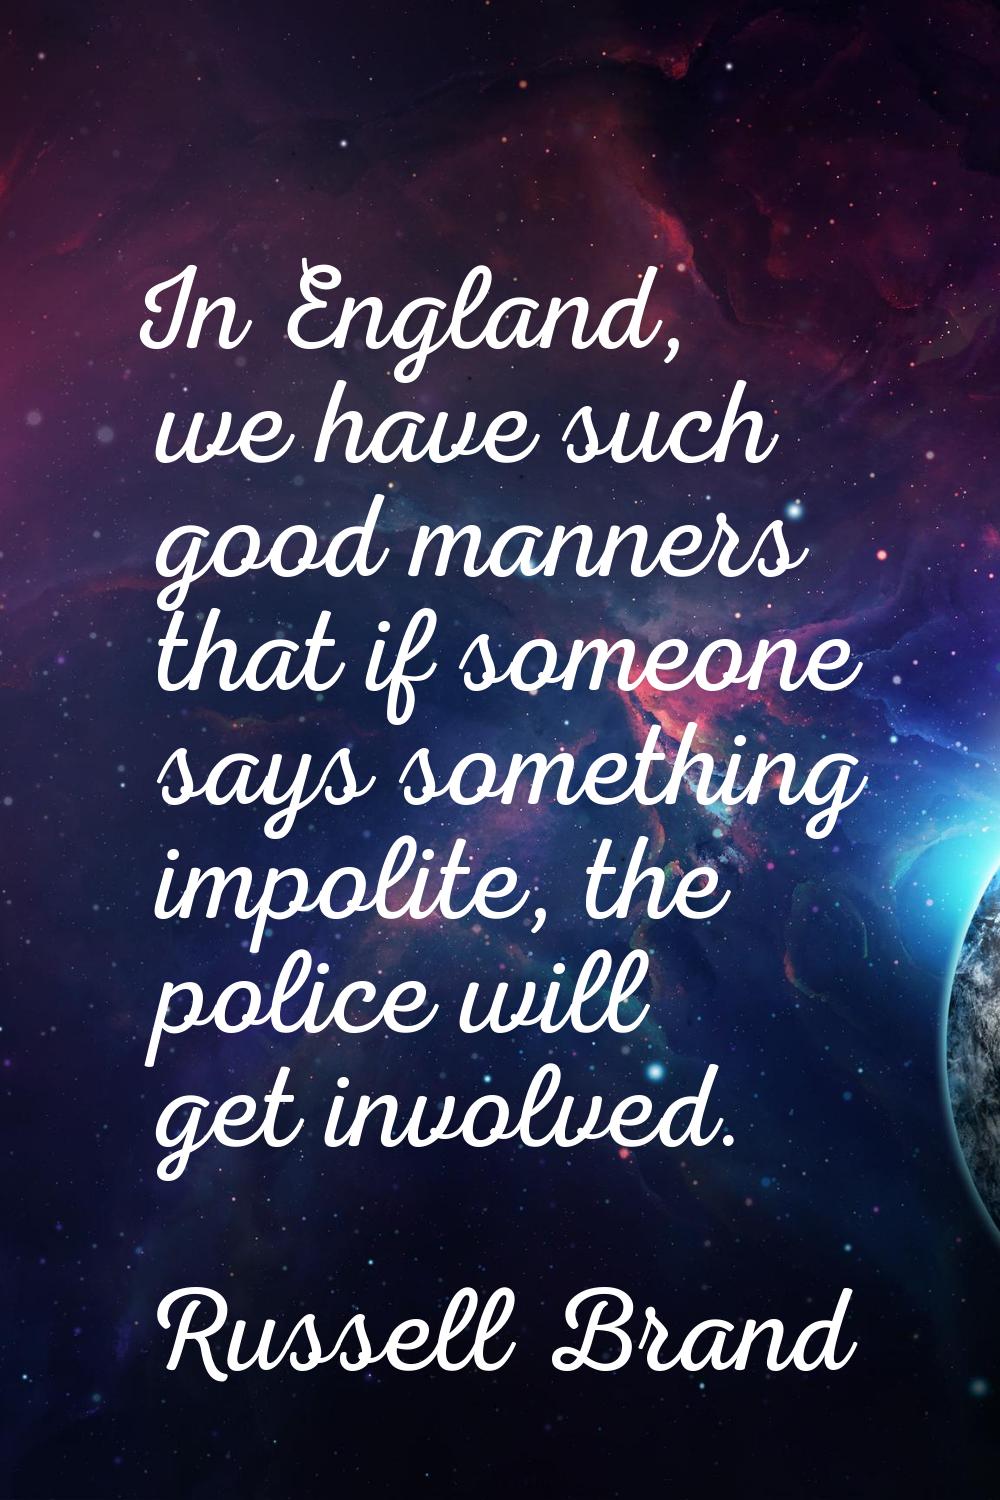 In England, we have such good manners that if someone says something impolite, the police will get 